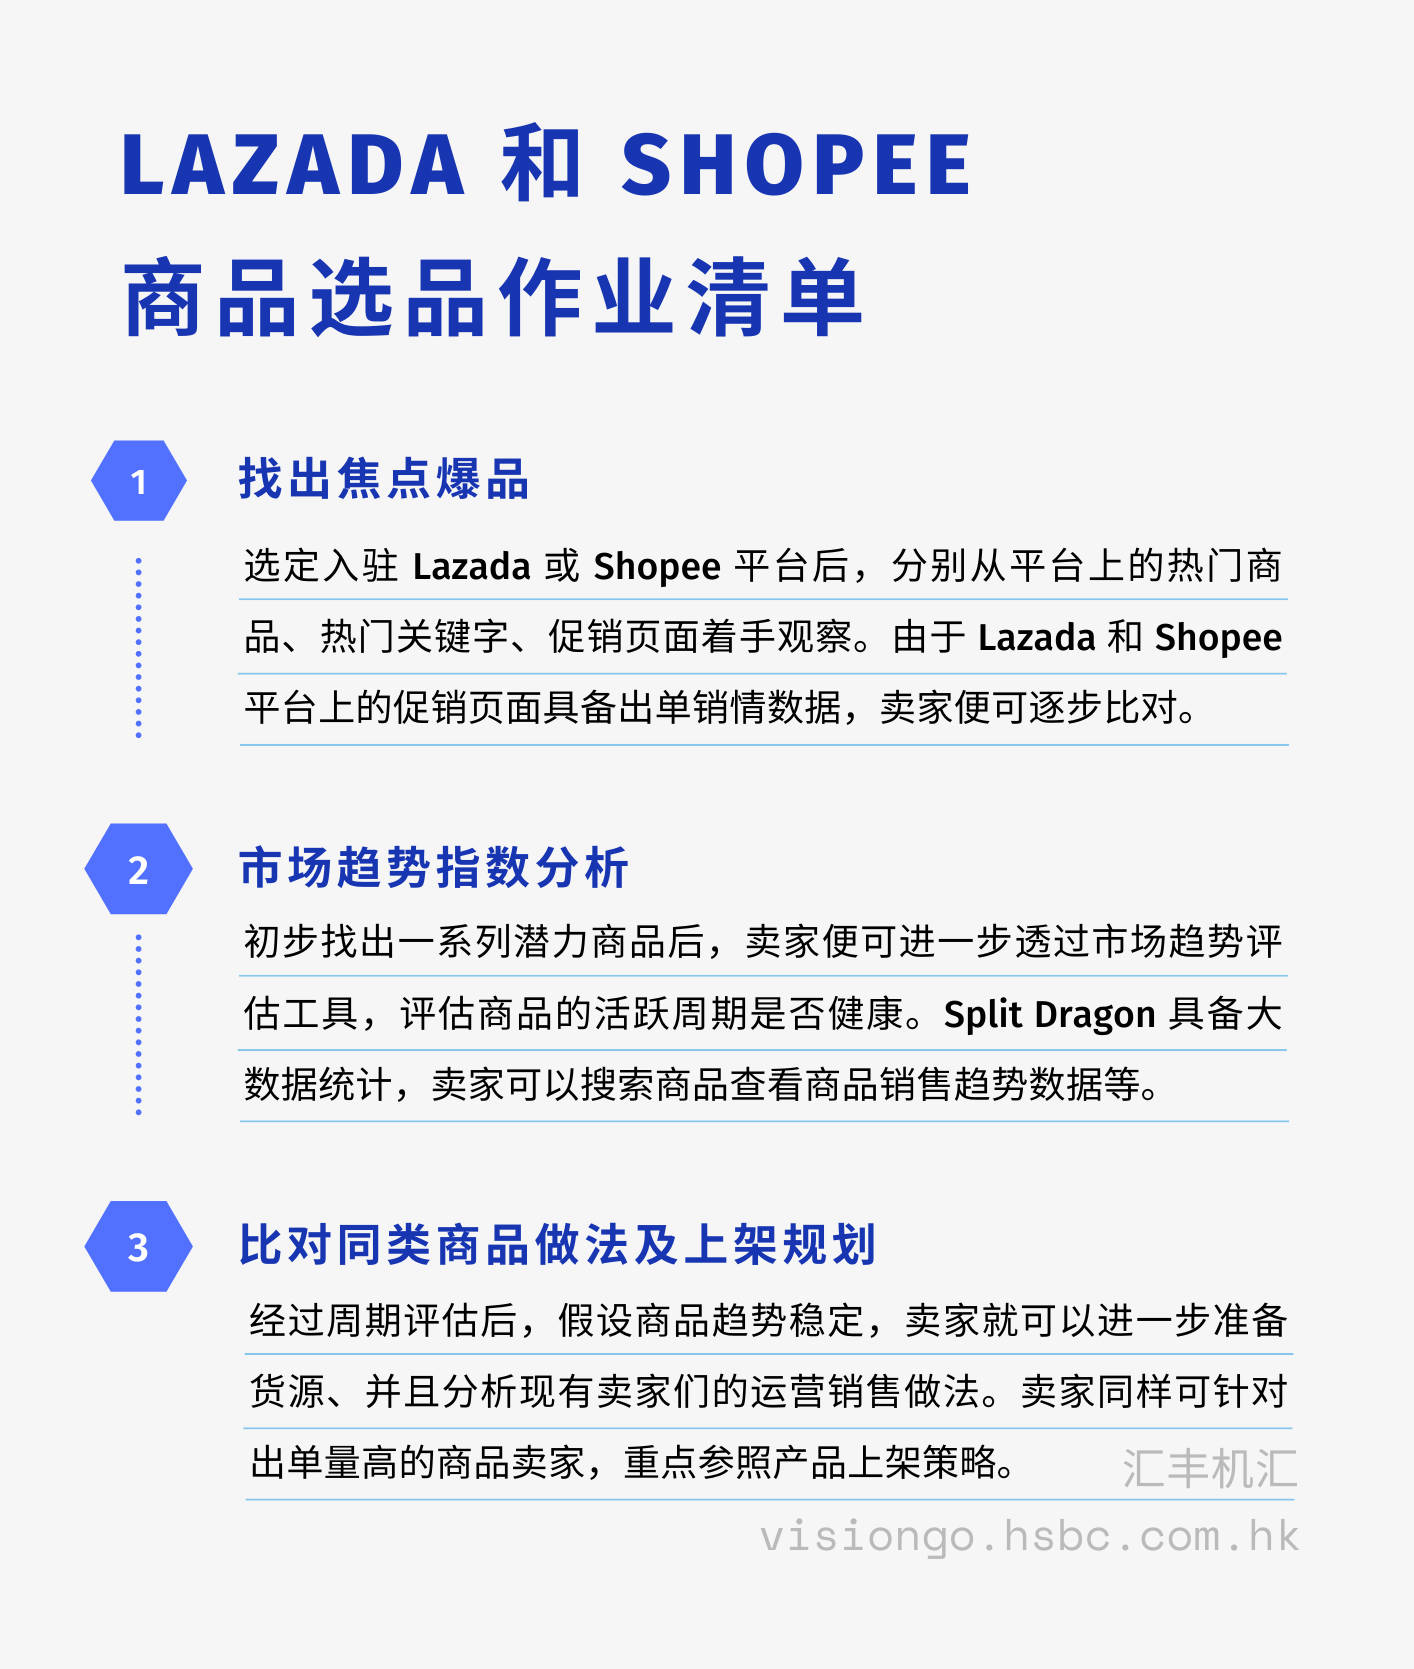 Lazada Shopee product sourcing tips and tricks, market research know how and expert tips list for reference.